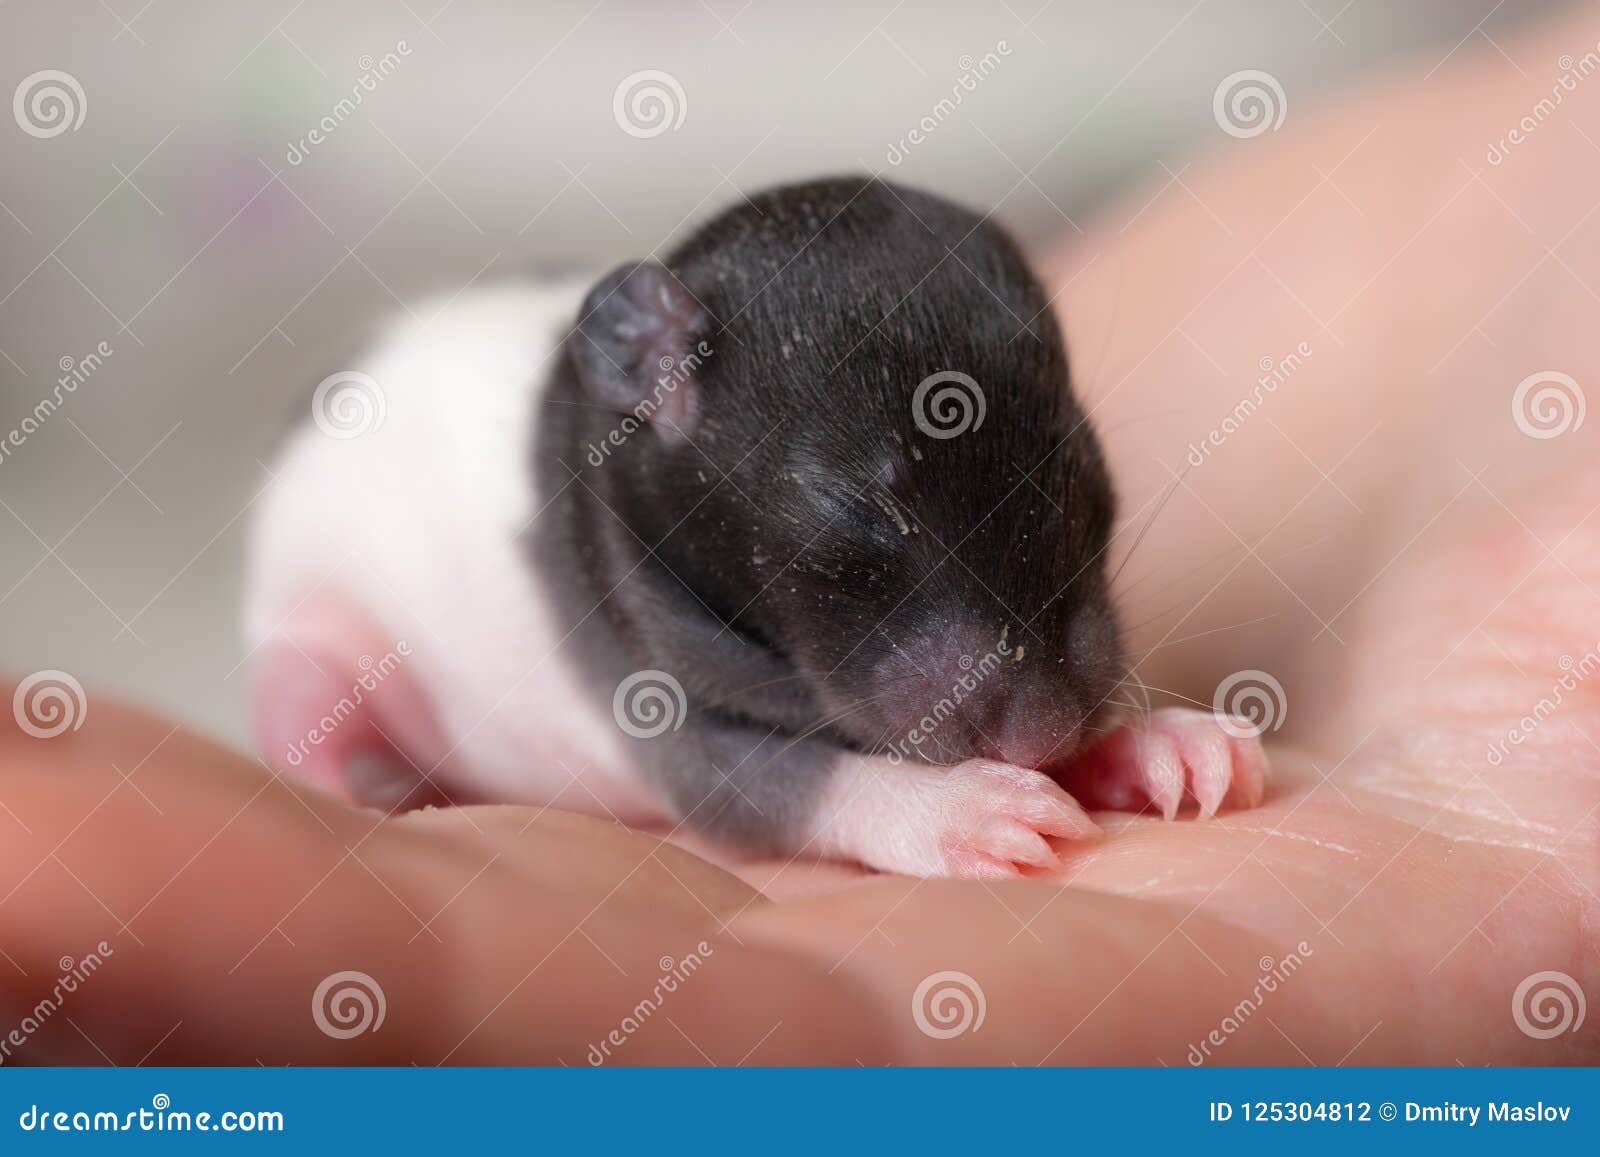 Very small blind baby rat stock photo. Image of animal - 125304812